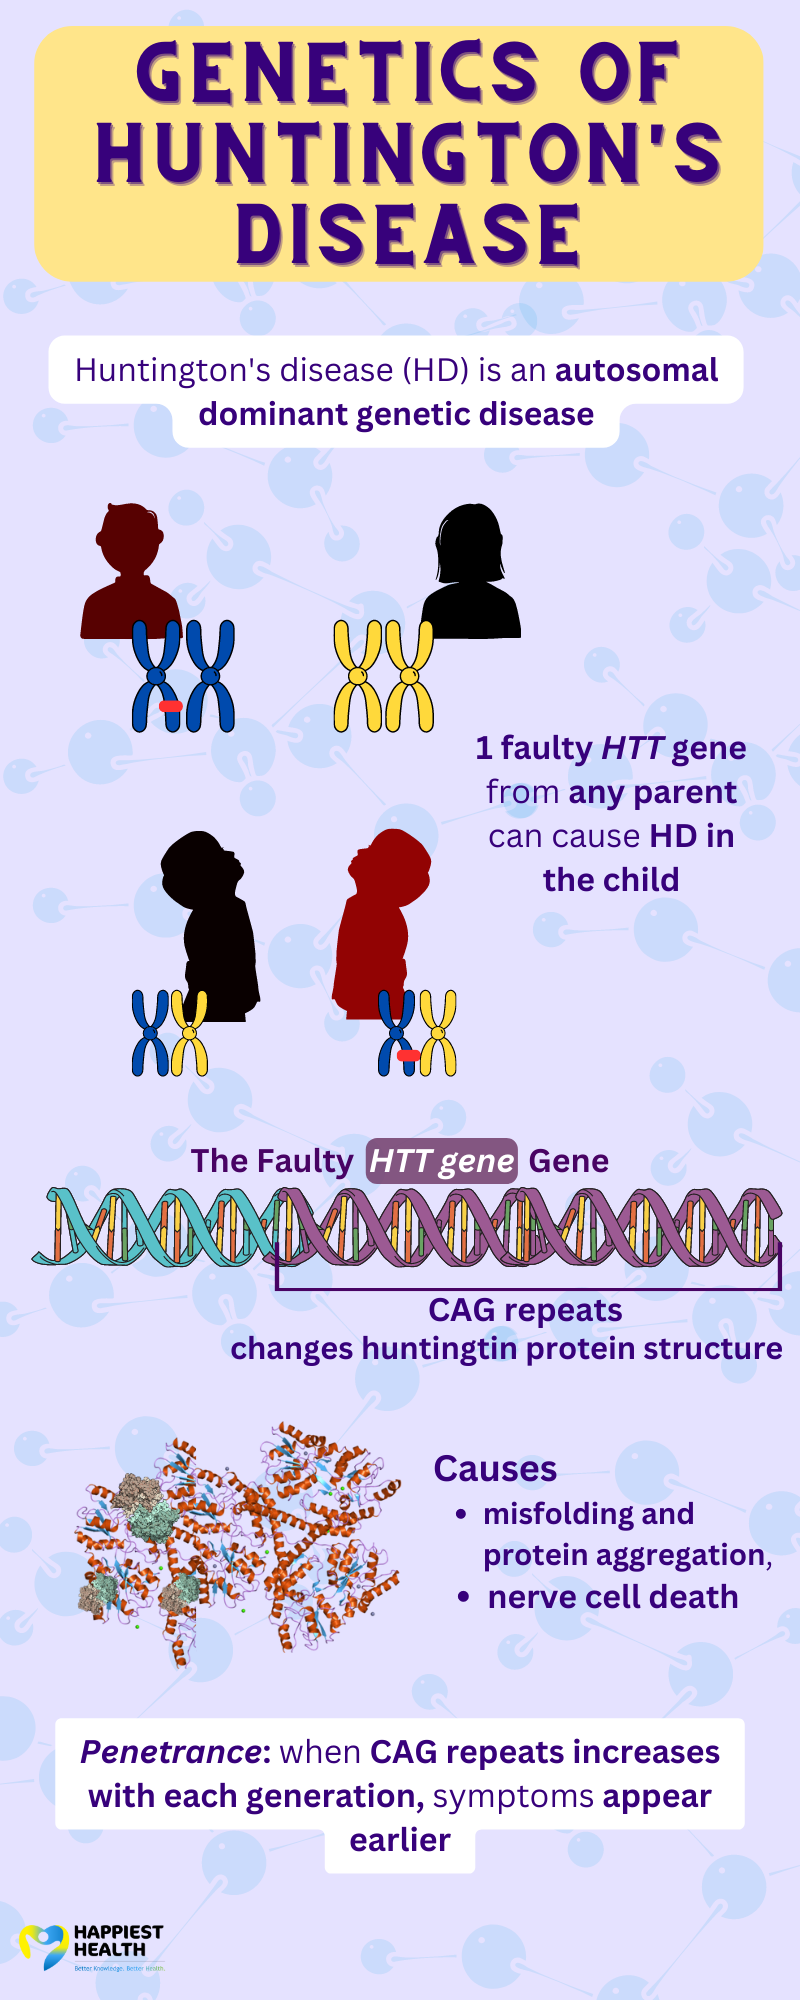 Huntington's disease (HD) is an autosomal dominant genetic disease.1 faulty HTT gene from any parent can cause HD in the child. -CAG- repeat in HTT gene changes in huntingtin protein structure Causes misfolding and protein aggregation, and cell death. Penetrance: when CAG repeats increases with each generation, symptoms appear earlier